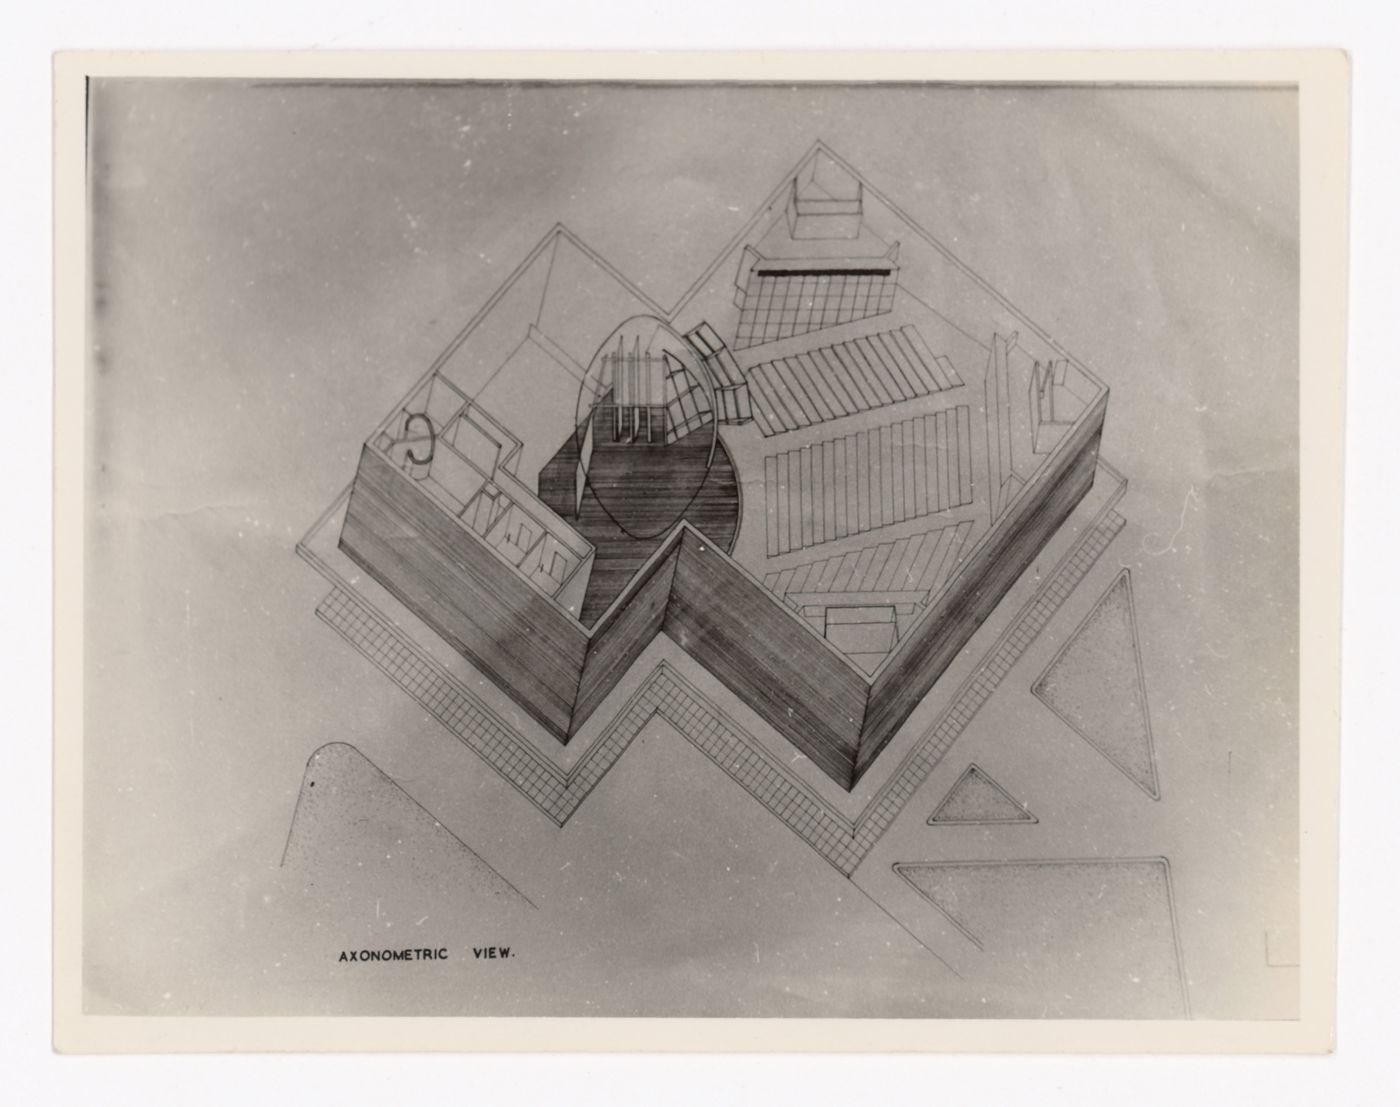 Photographic reproduction of axonometric drawing for Tagore Theatre, Chandigarh, India